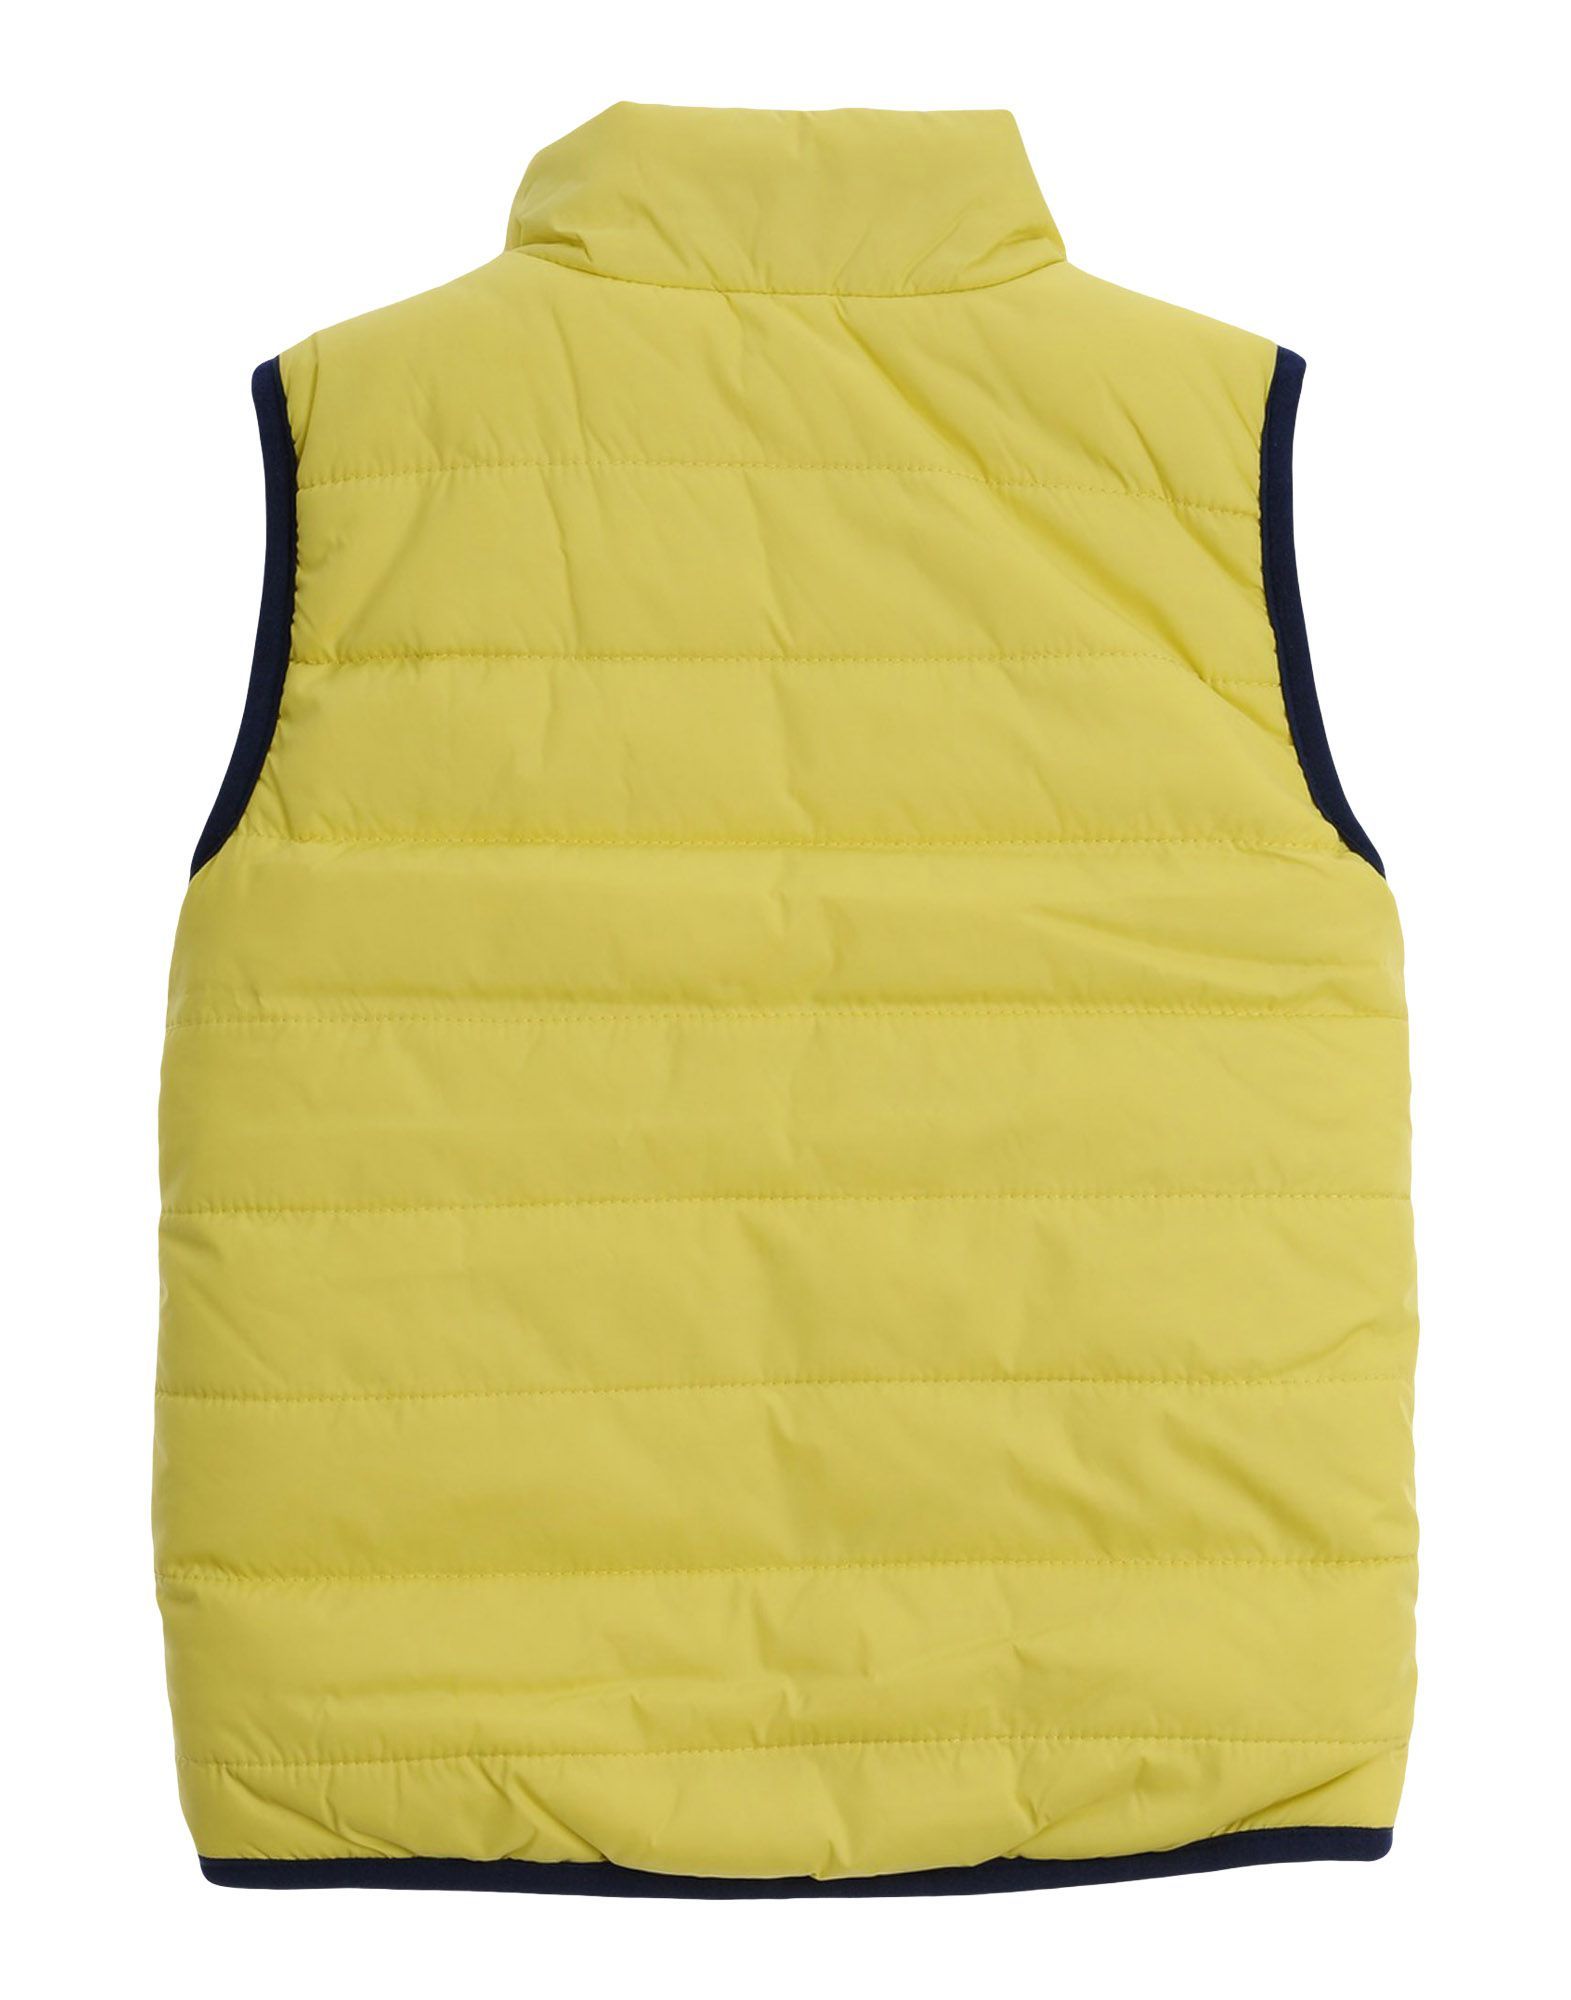 techno fabric, logo, basic solid colour, single-breasted , zip, turtleneck, multipockets, sleeveless, padded inner, wash at 30� c, do not dry clean, do not iron, do not bleach, do not tumble dry, gilet